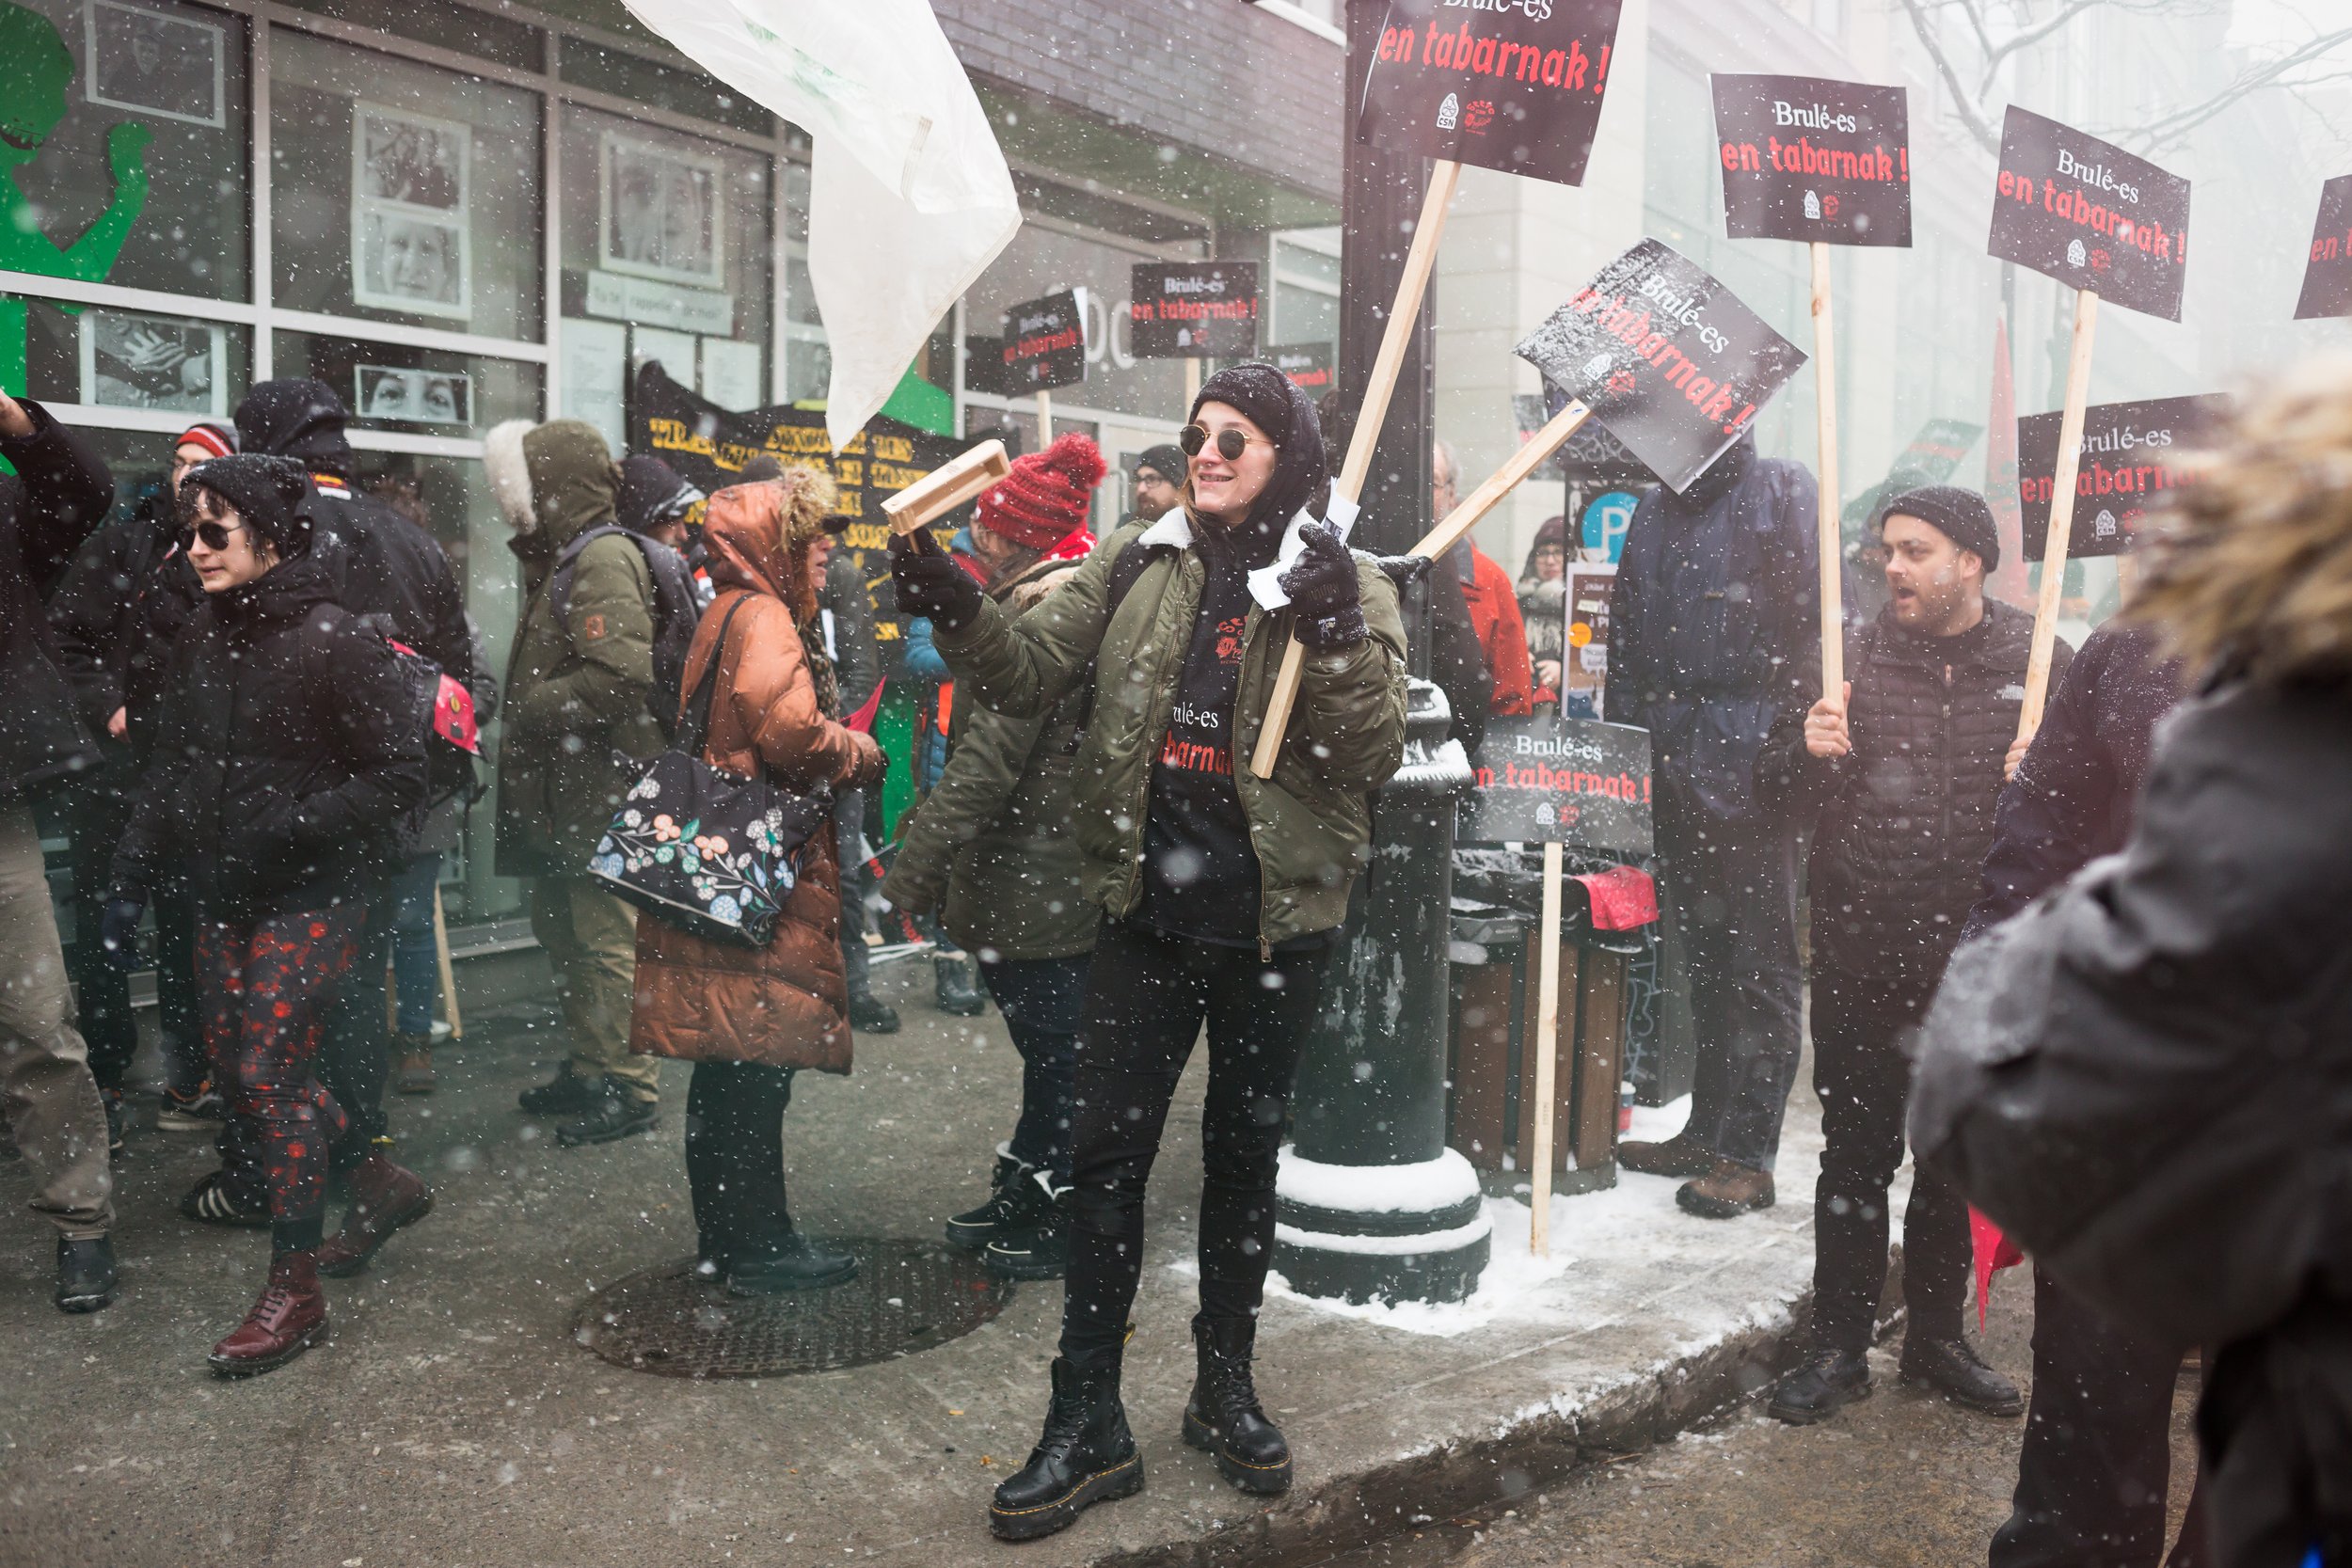  Laurence Fortin uses a wooden noisemaker on a STTIC-CSN picket line outside Cactus on December 18, 2019. (Briarpatch 2019) 